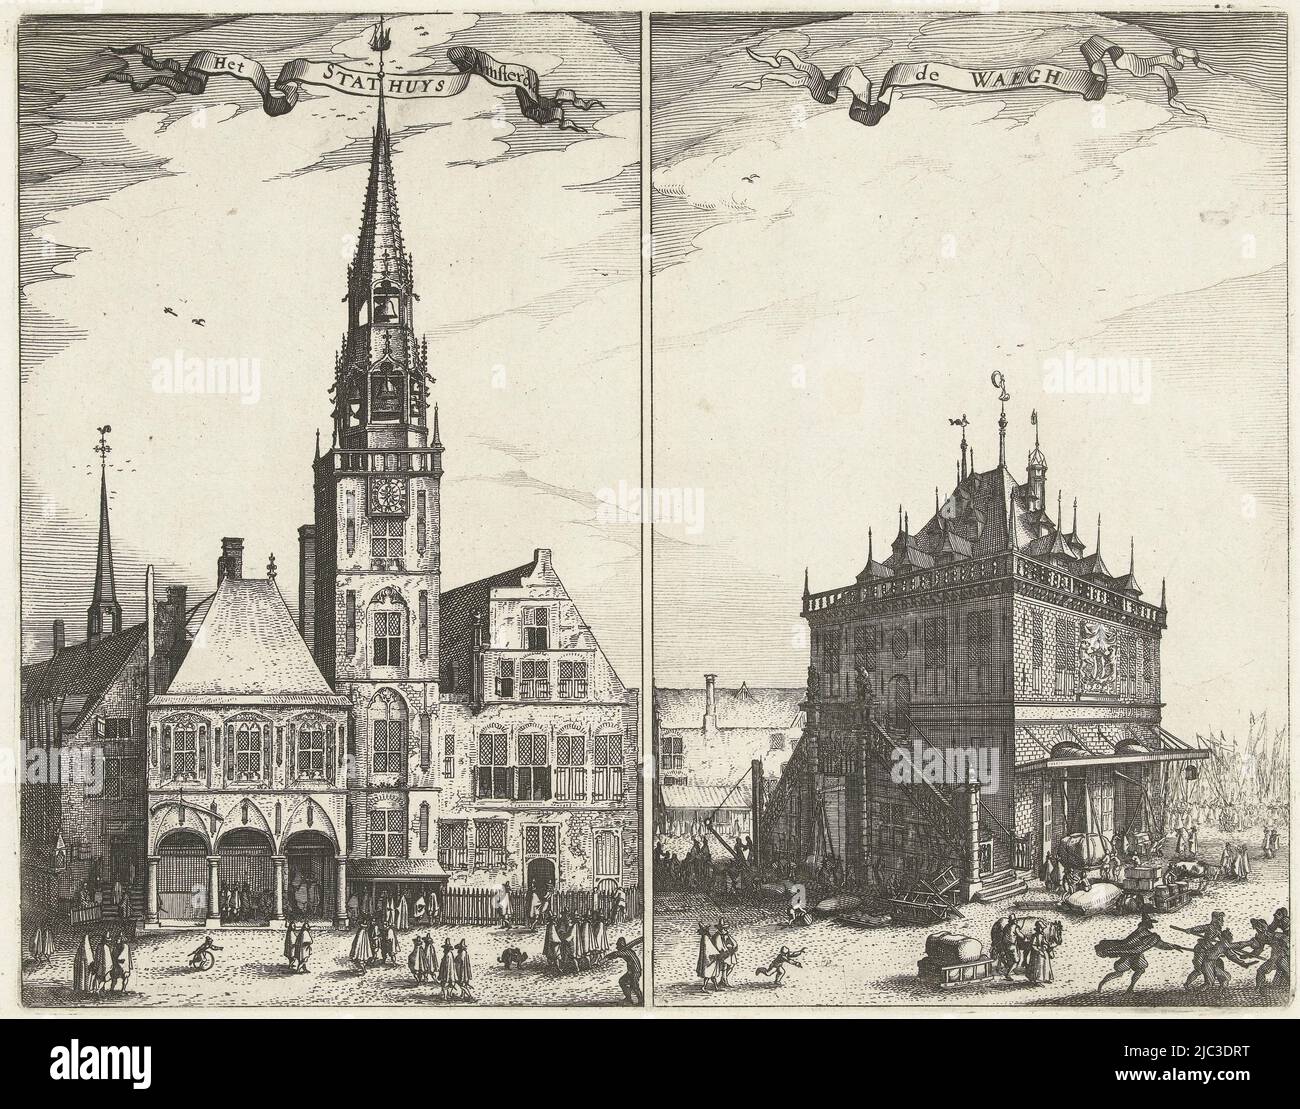 View of the Old City Hall and the Waag on Dam Square in Amsterdam. Two representations on one slide. On the left the town hall, still with its spire demolished in 1615. In the foreground several figures. Above in the middle a banderole with the title. To the right the Waag, where goods are loaded, weighed and transported, seen from the south west. To the right in the foreground two fighting men. Above in the middle a banderole with the title, Het Oude Stadhuis en de Waag op de Dam te Amsterdam Het Stathuys t' Amsterdam / de Waegh (title on object), print maker: Claes Jansz. Visscher (II Stock Photo